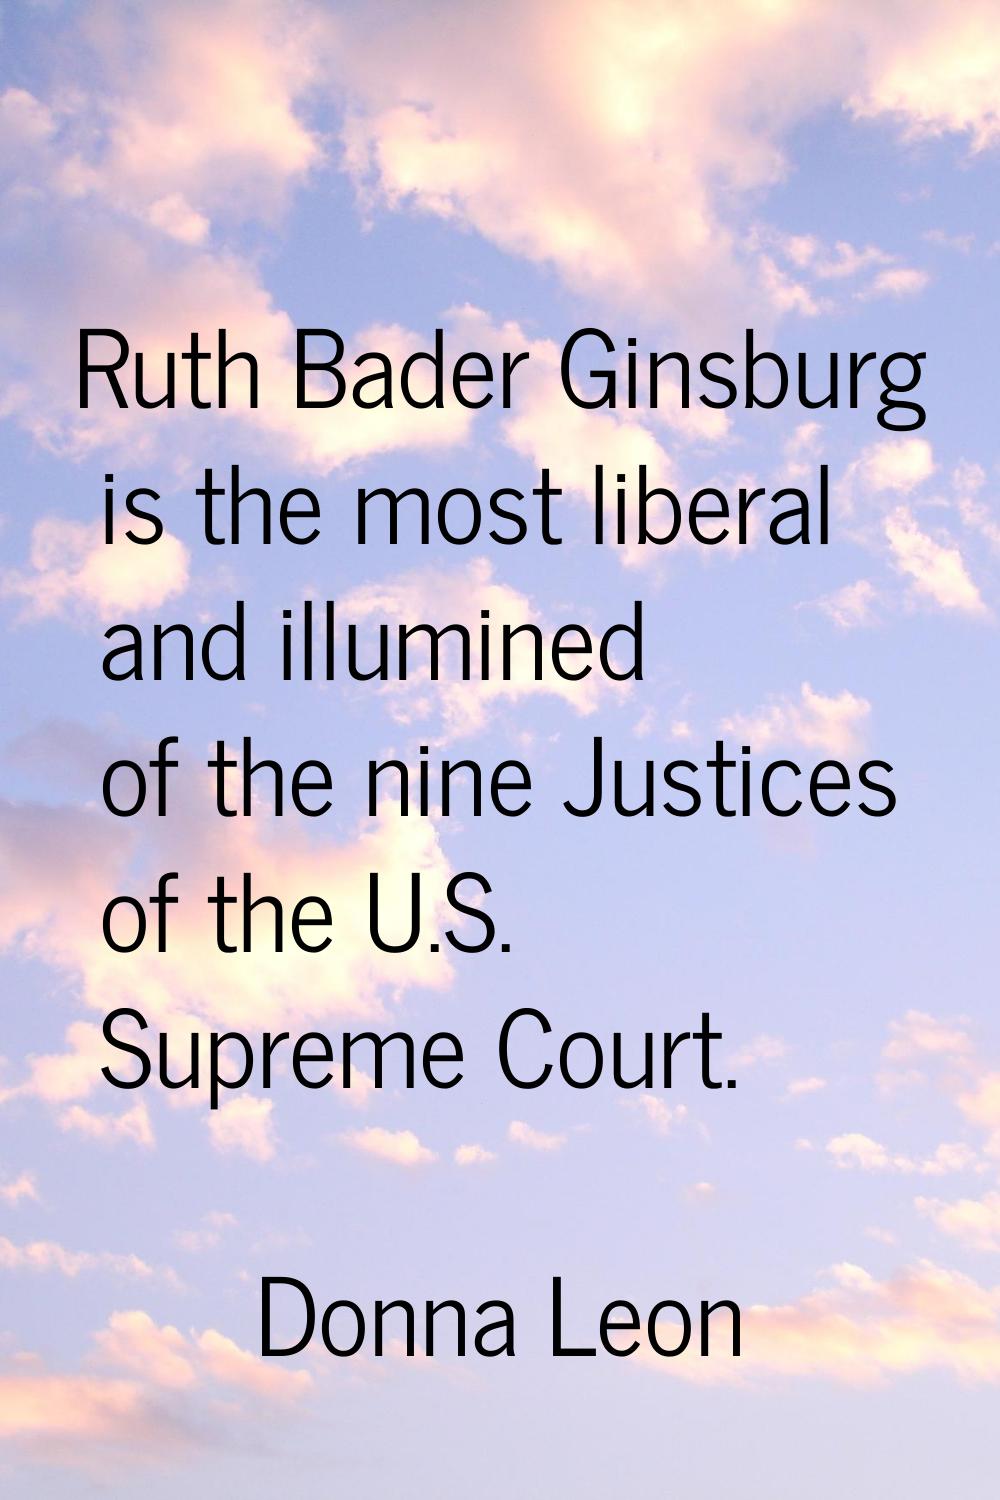 Ruth Bader Ginsburg is the most liberal and illumined of the nine Justices of the U.S. Supreme Cour